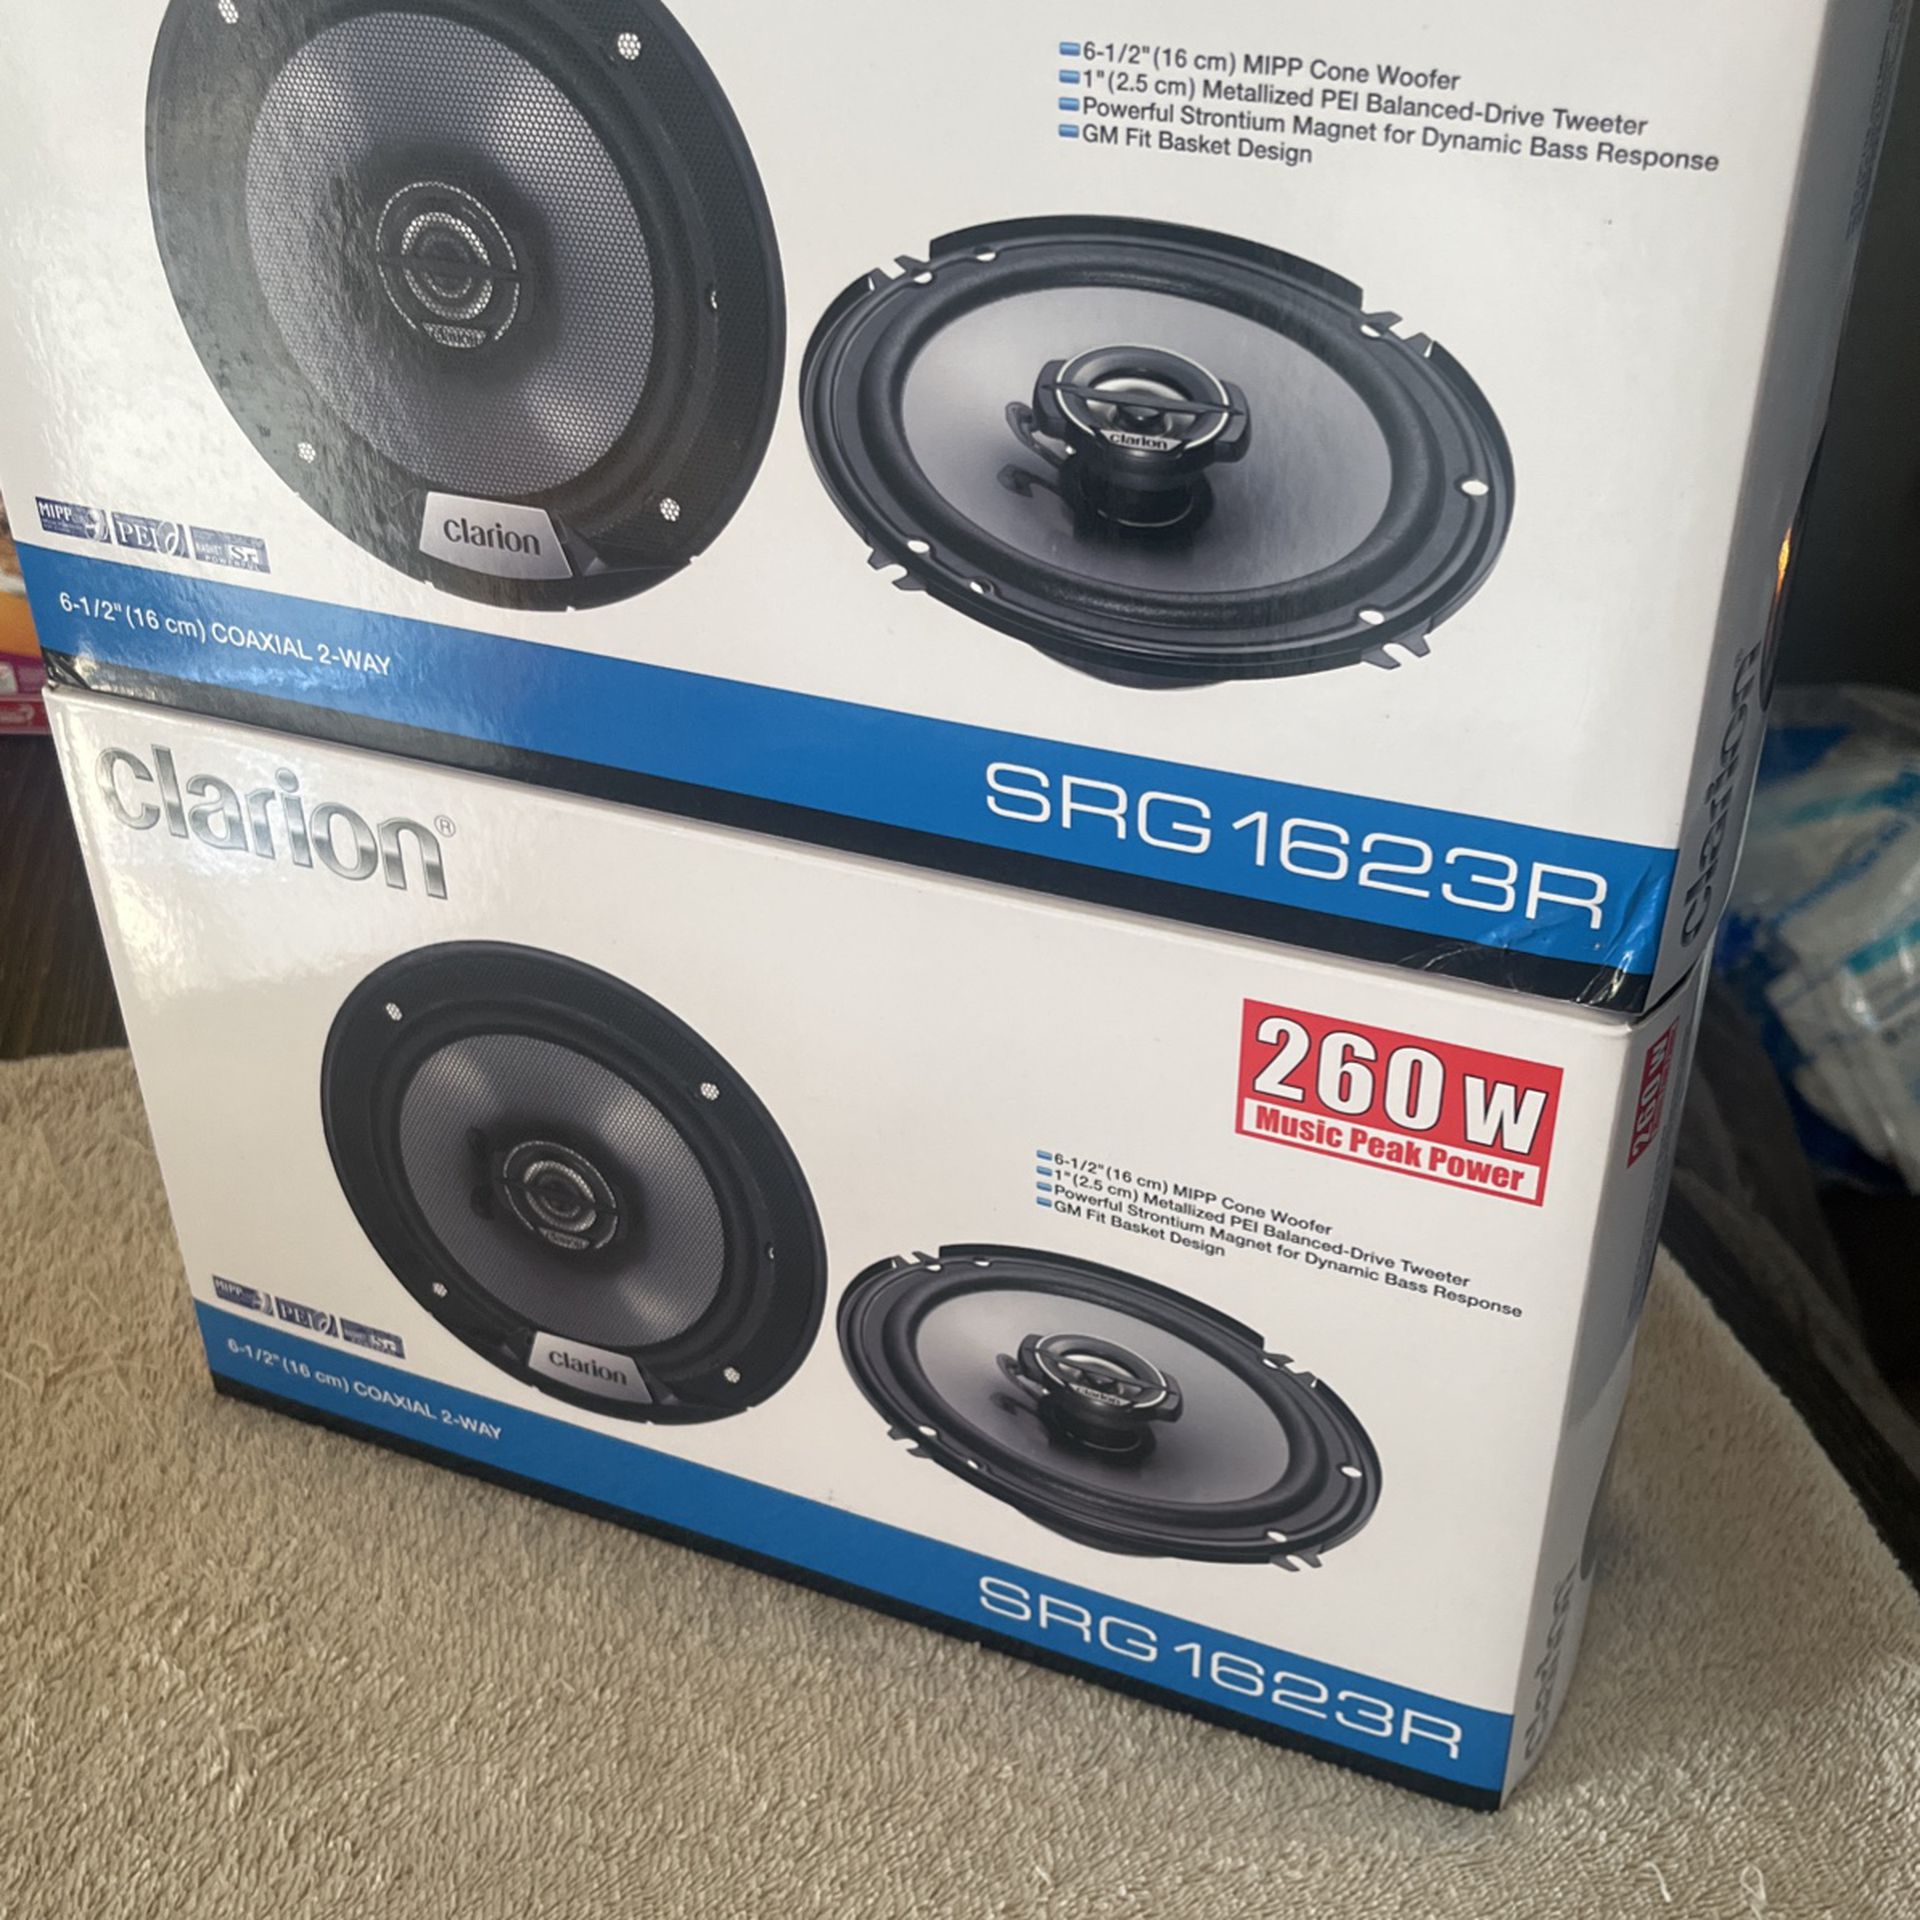 New Clarion SRG1623R 40 Watts 6.5-Inch 2-Way SRG Series Car Audio Coaxial 4 Speakers